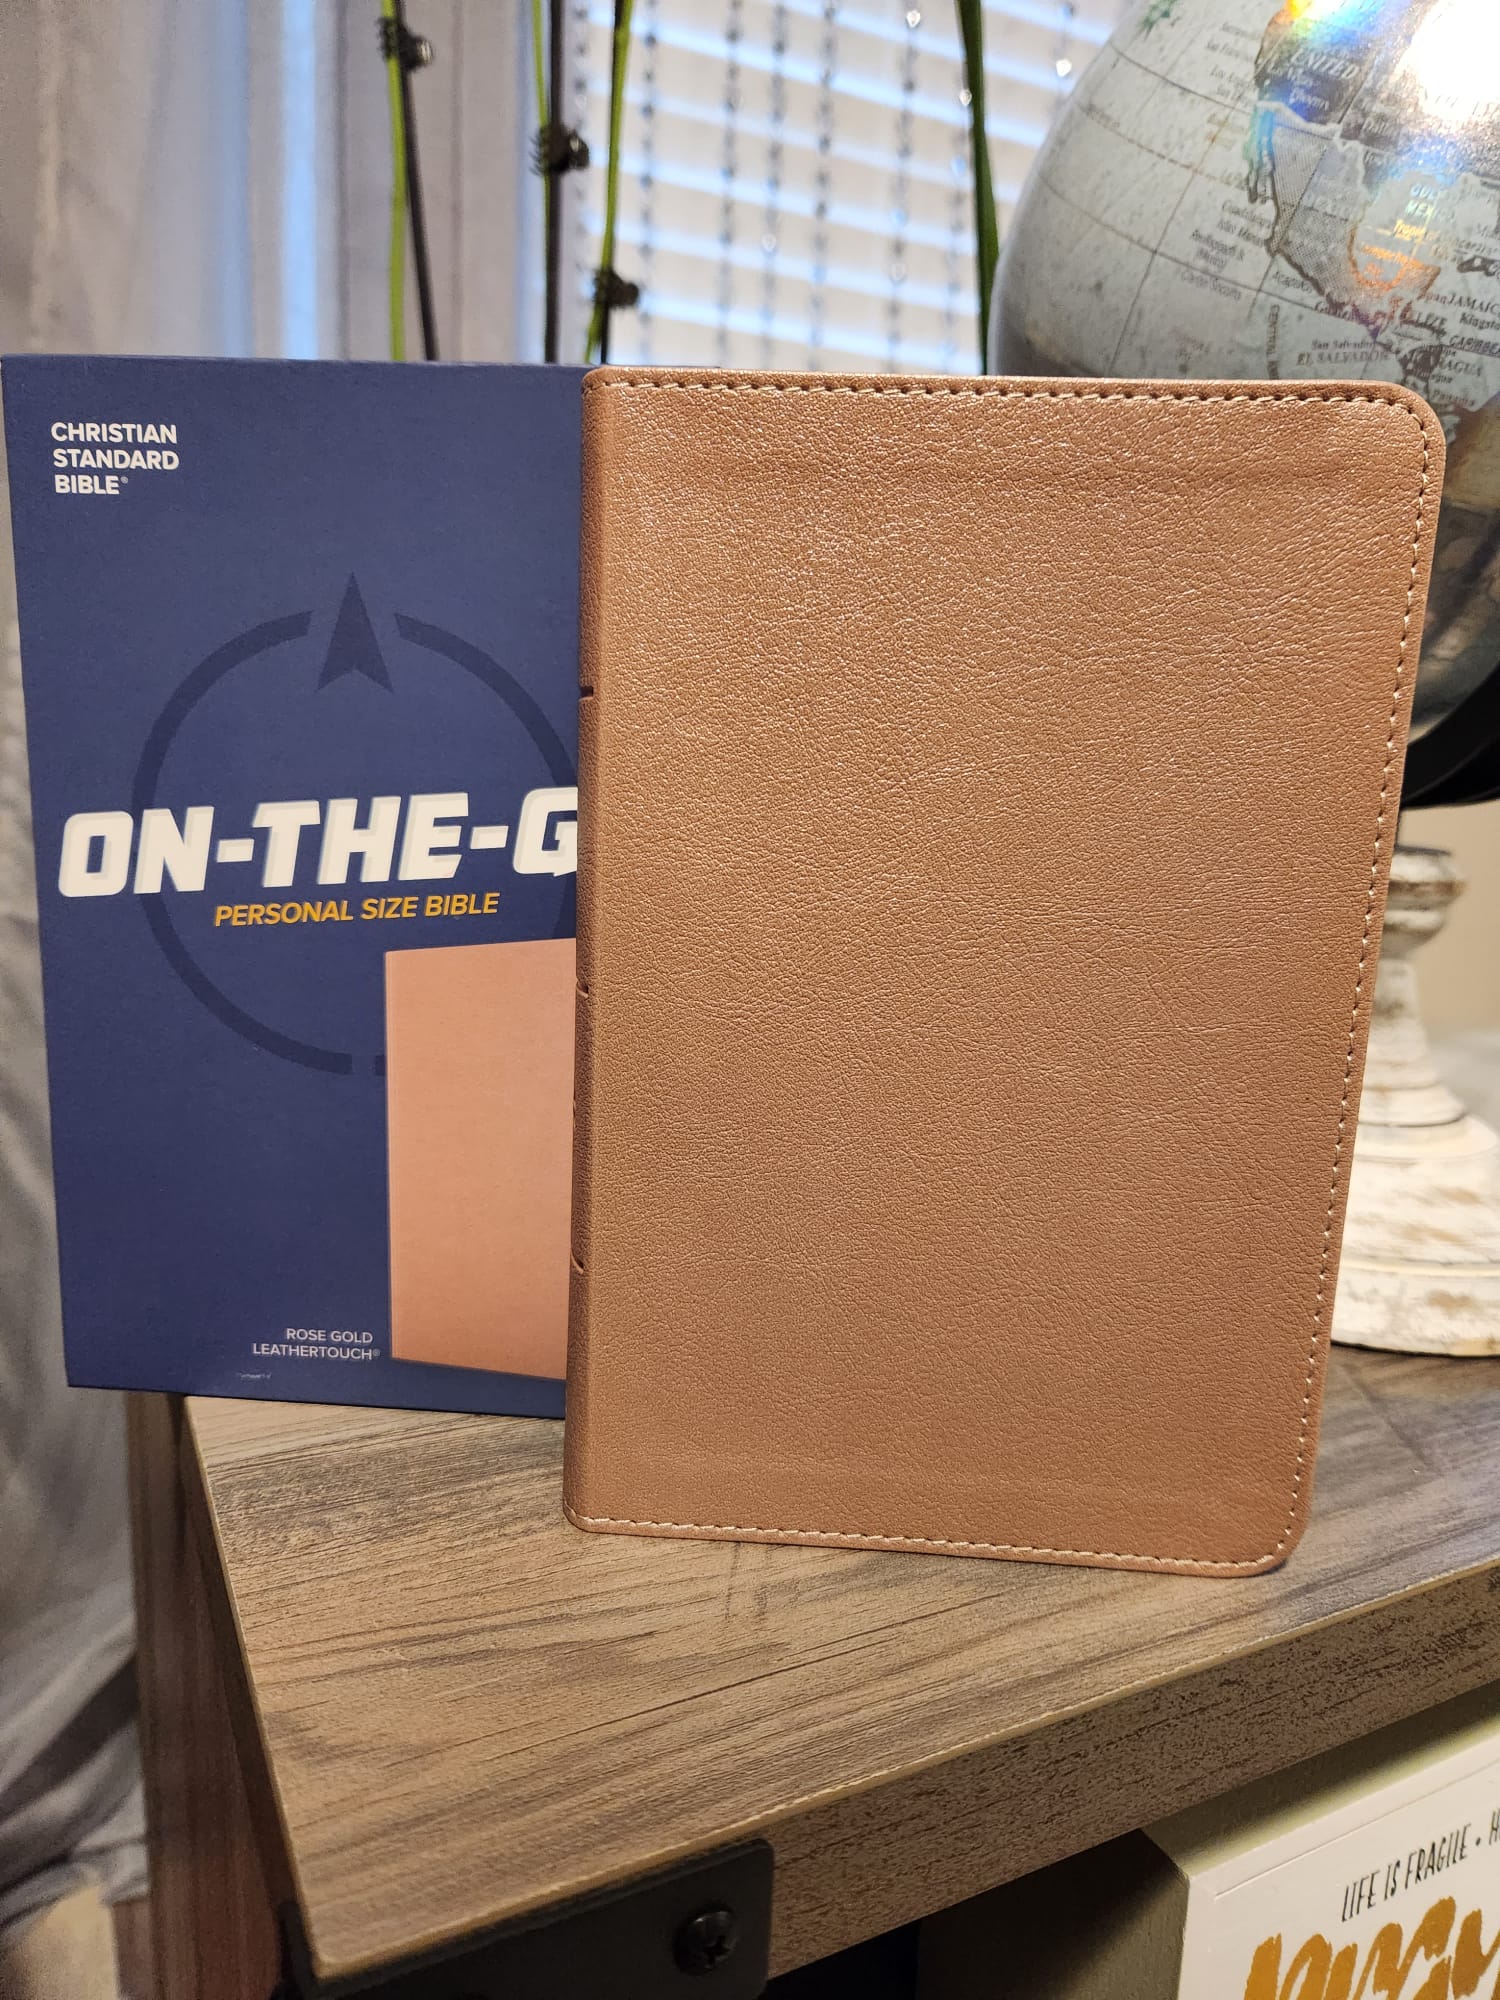 Rose Gold LeatherTouch Bible